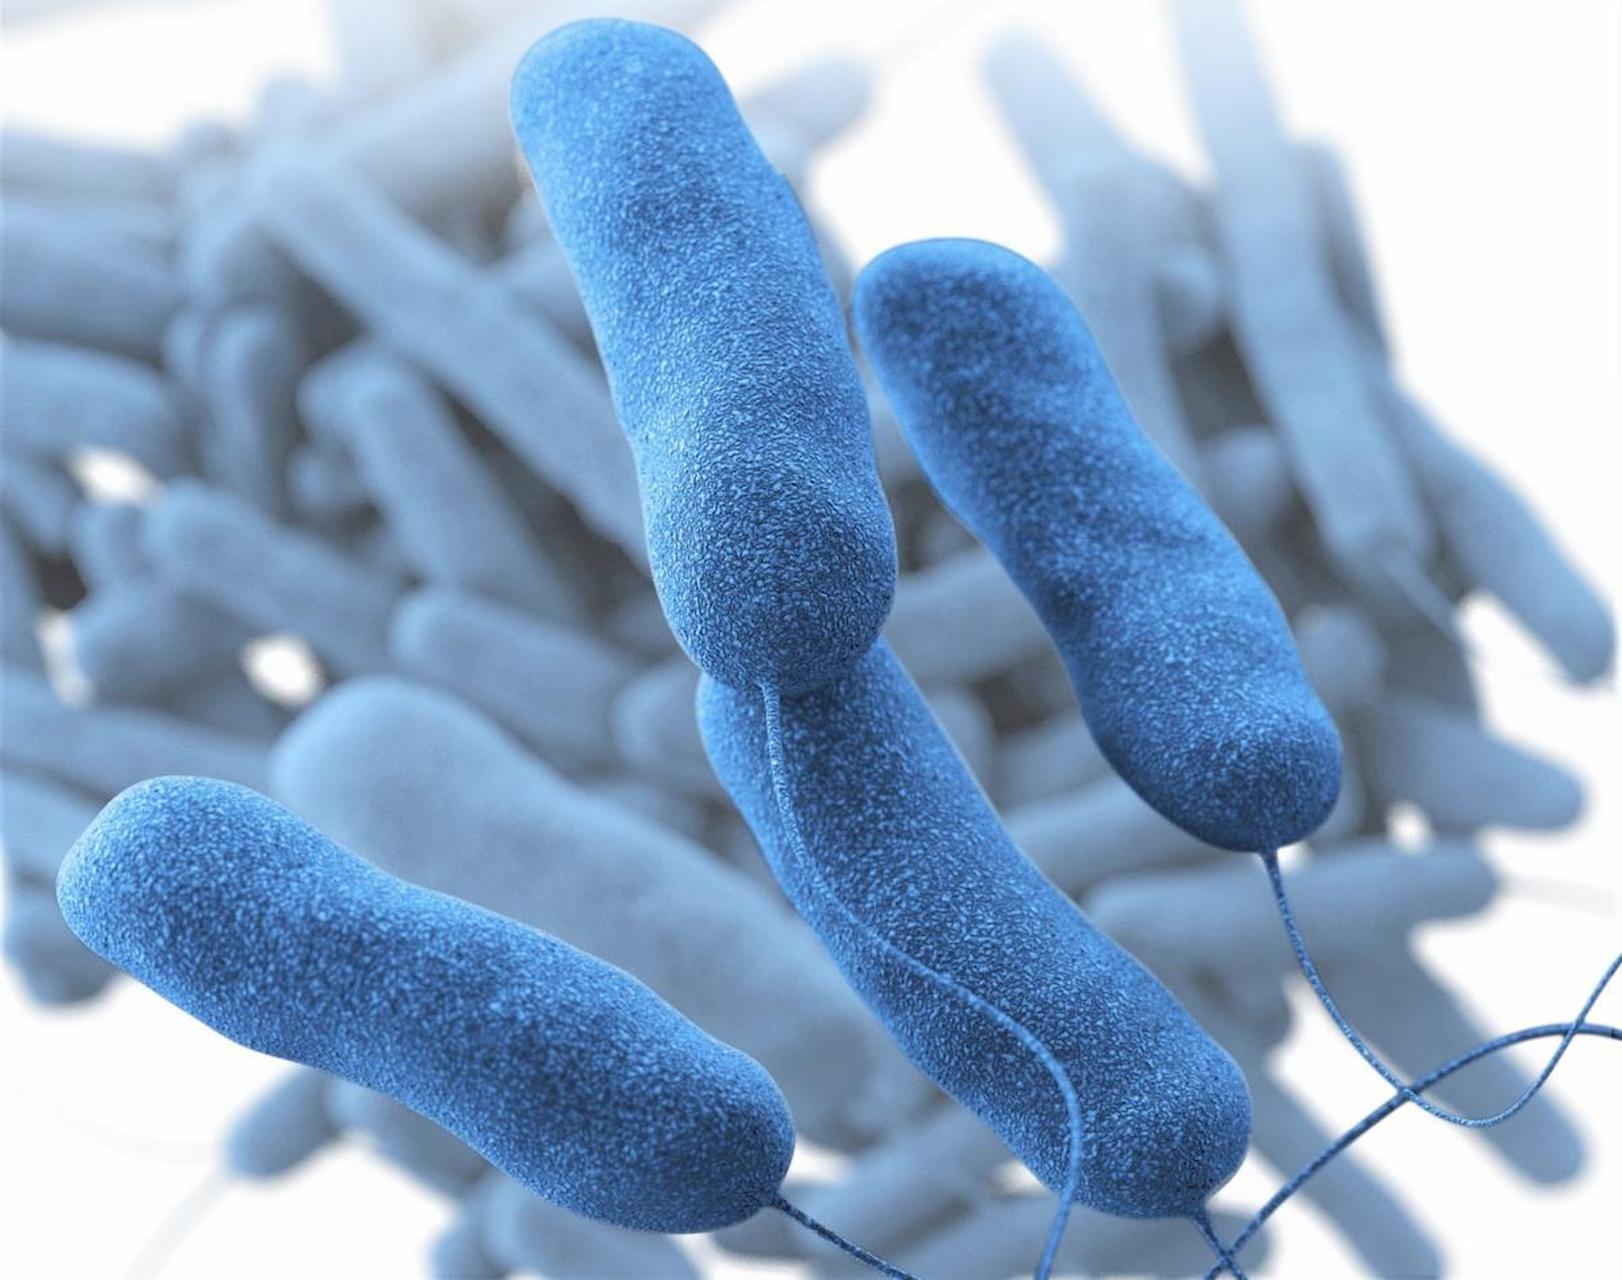 What Types Of Services Are Provided By Legionella Risk Experts?